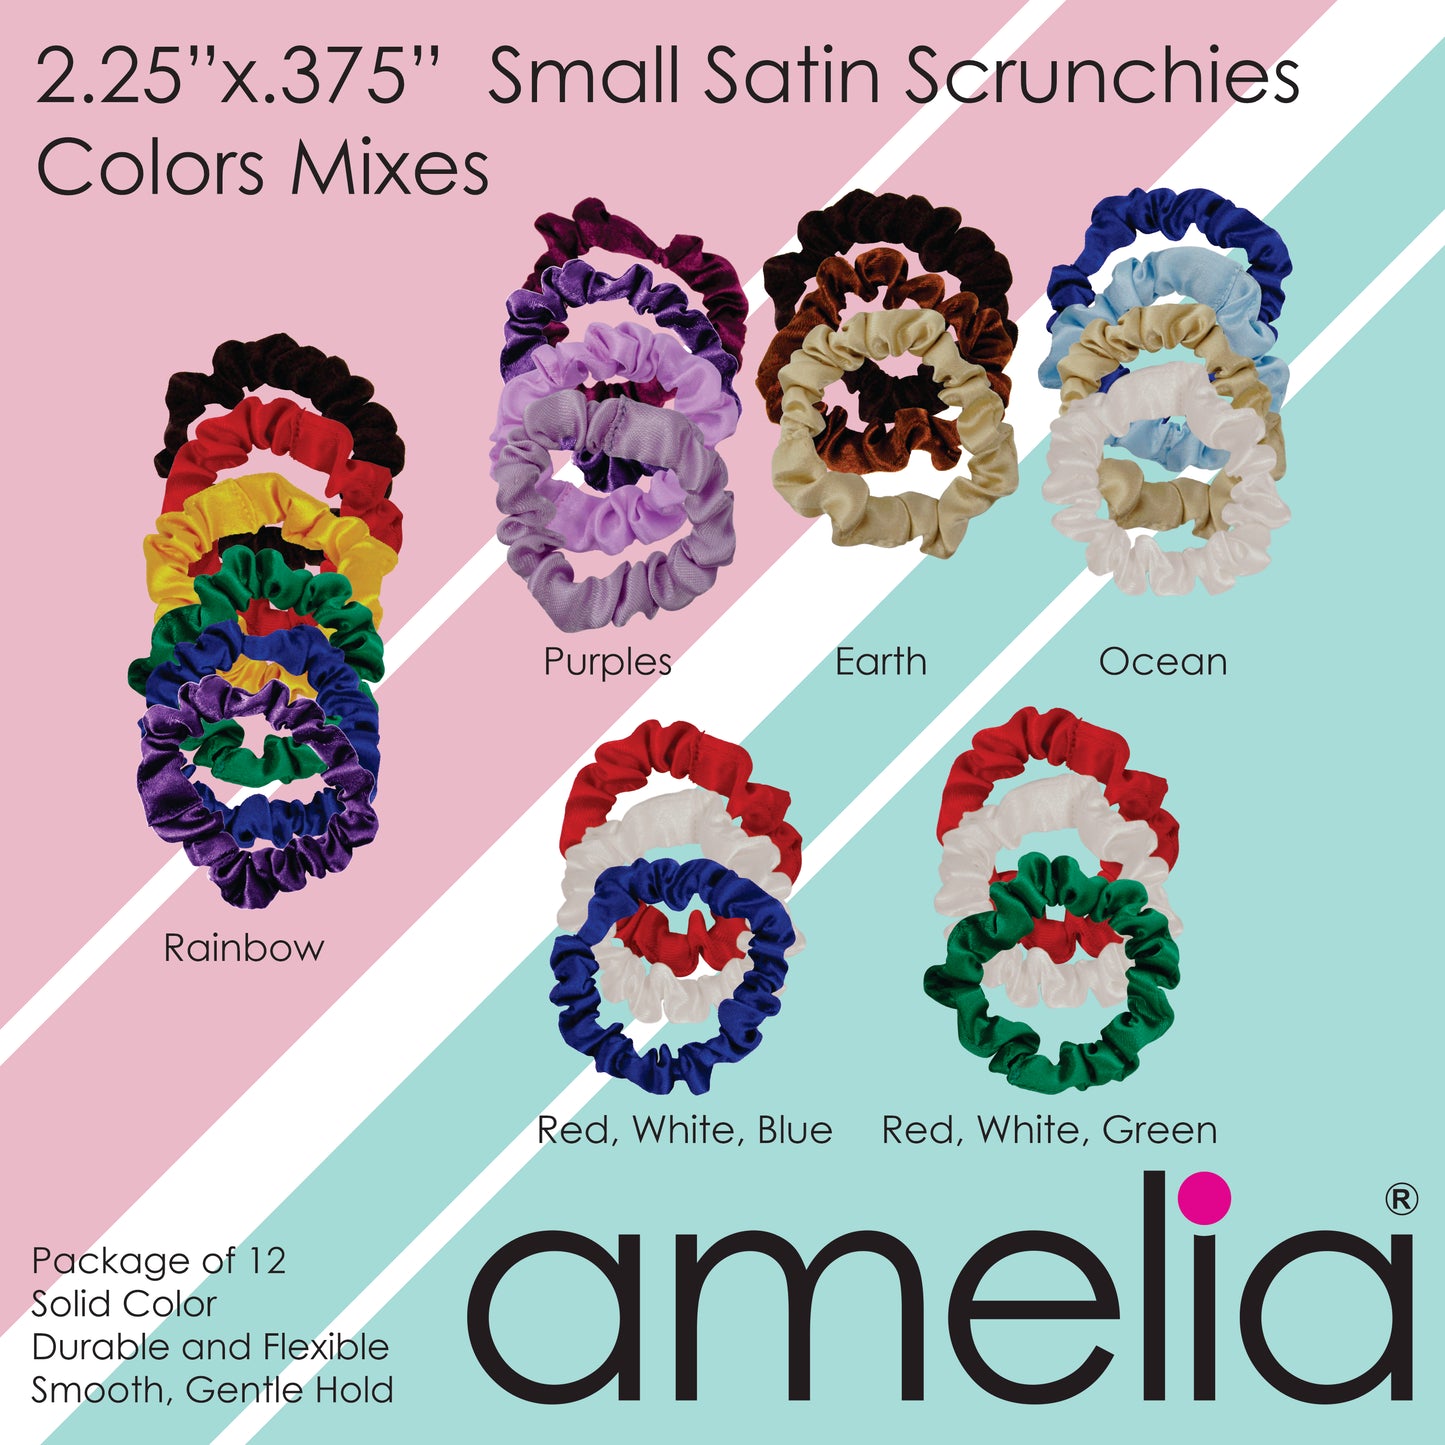 Amelia Beauty, Purple Mix Satin Scrunchies, 2.25in Diameter, Gentle on Hair, Strong Hold, No Snag, No Dents or Creases. 12 Pack